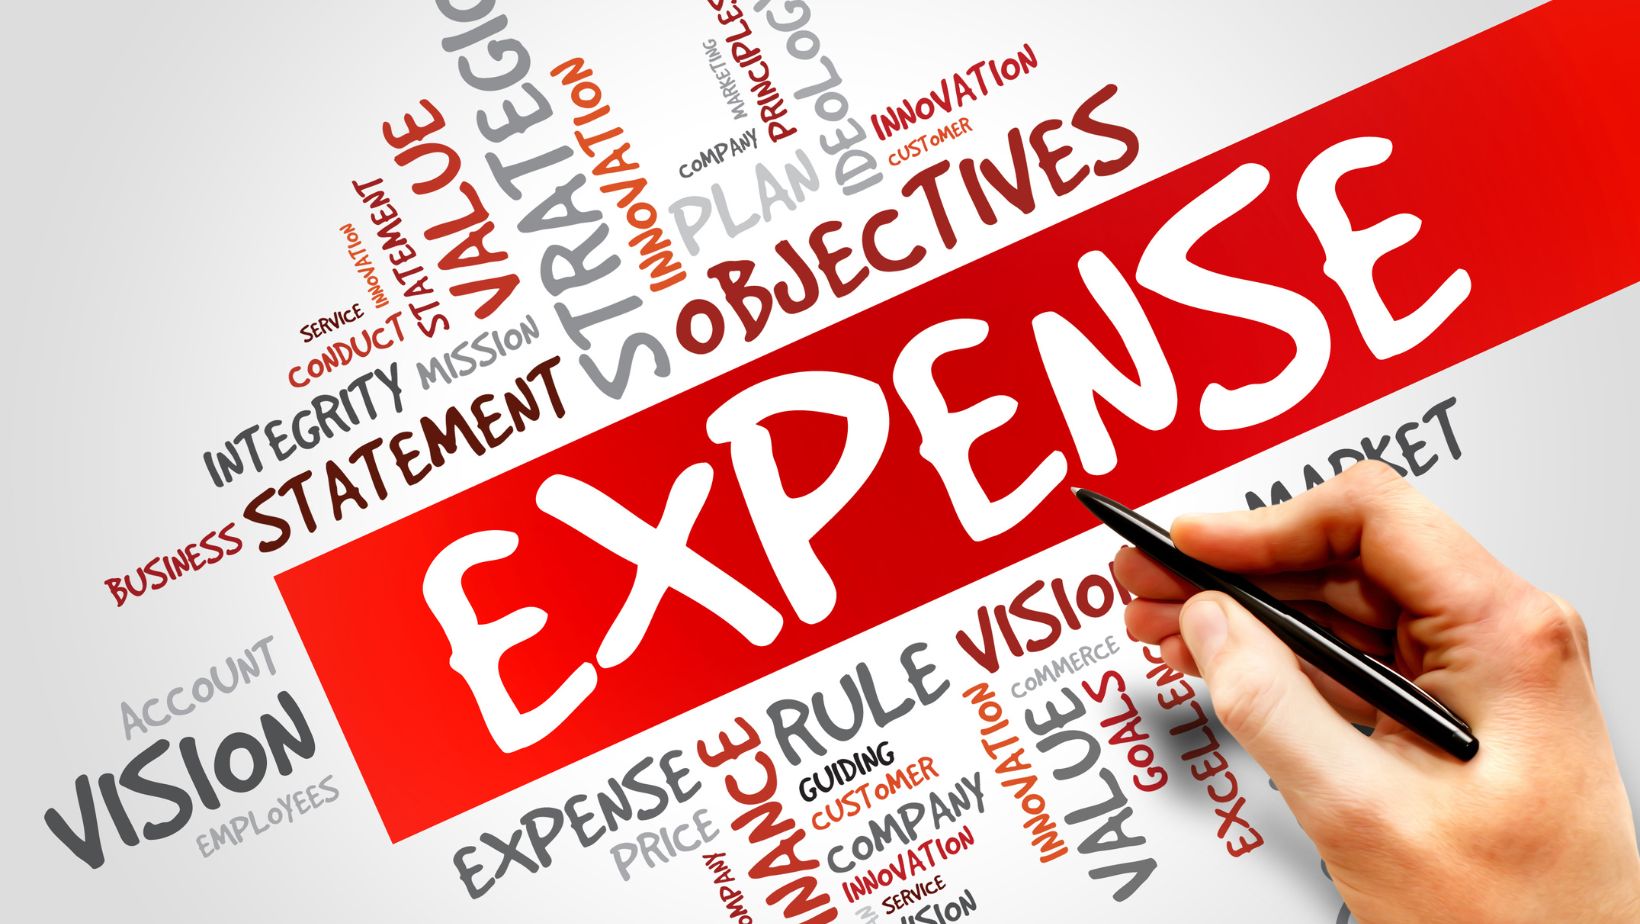 are good places to look to find your current expenses when building your budget.